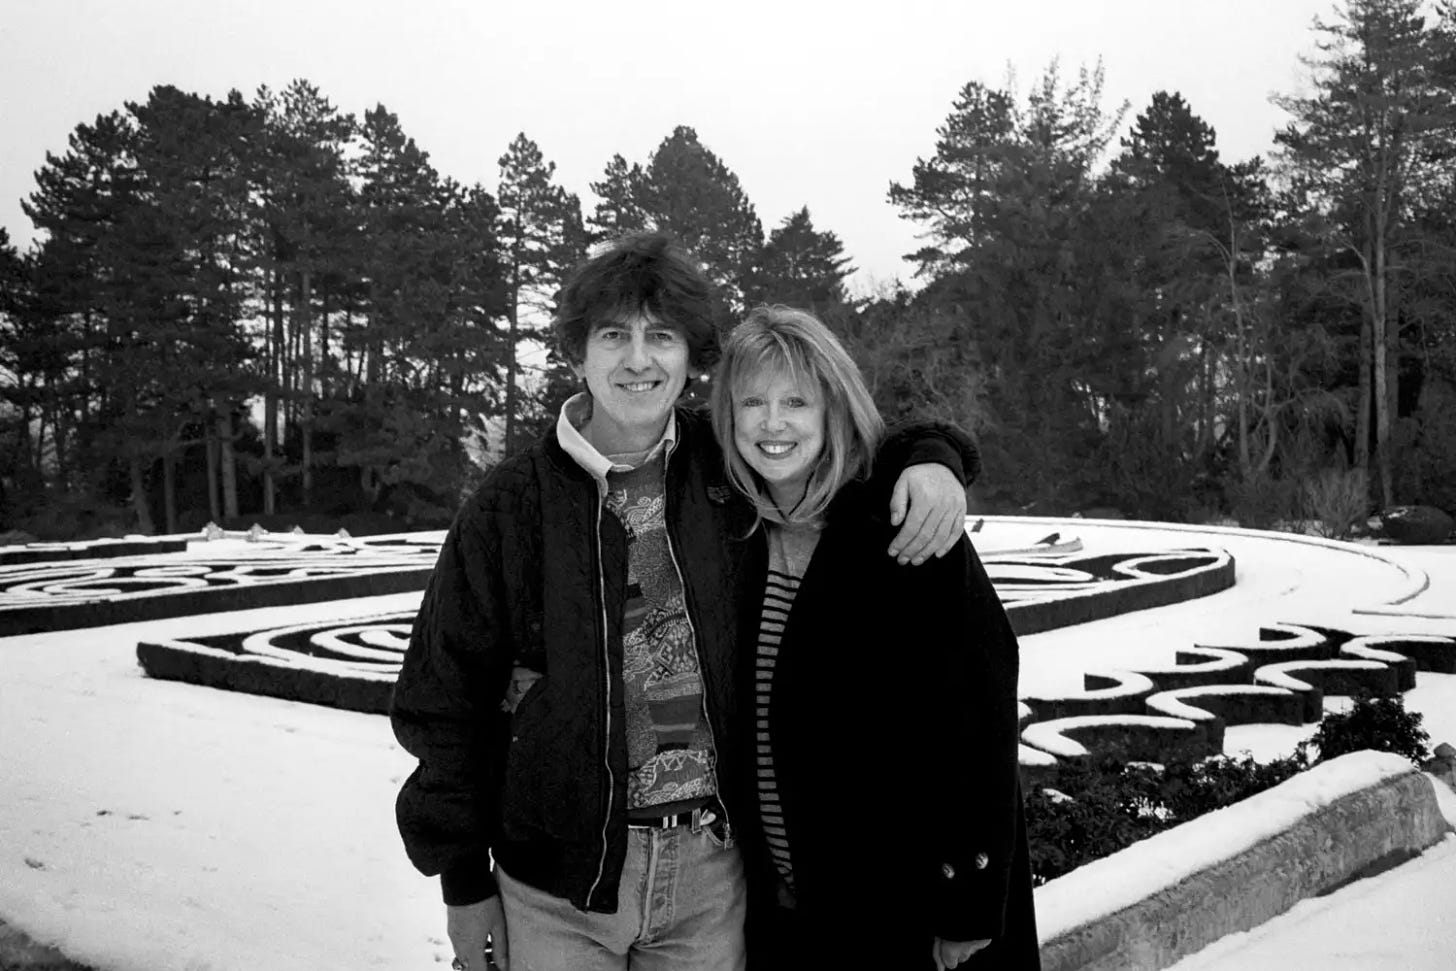 George Harrison and Pattie Boyd in the snow, 1991